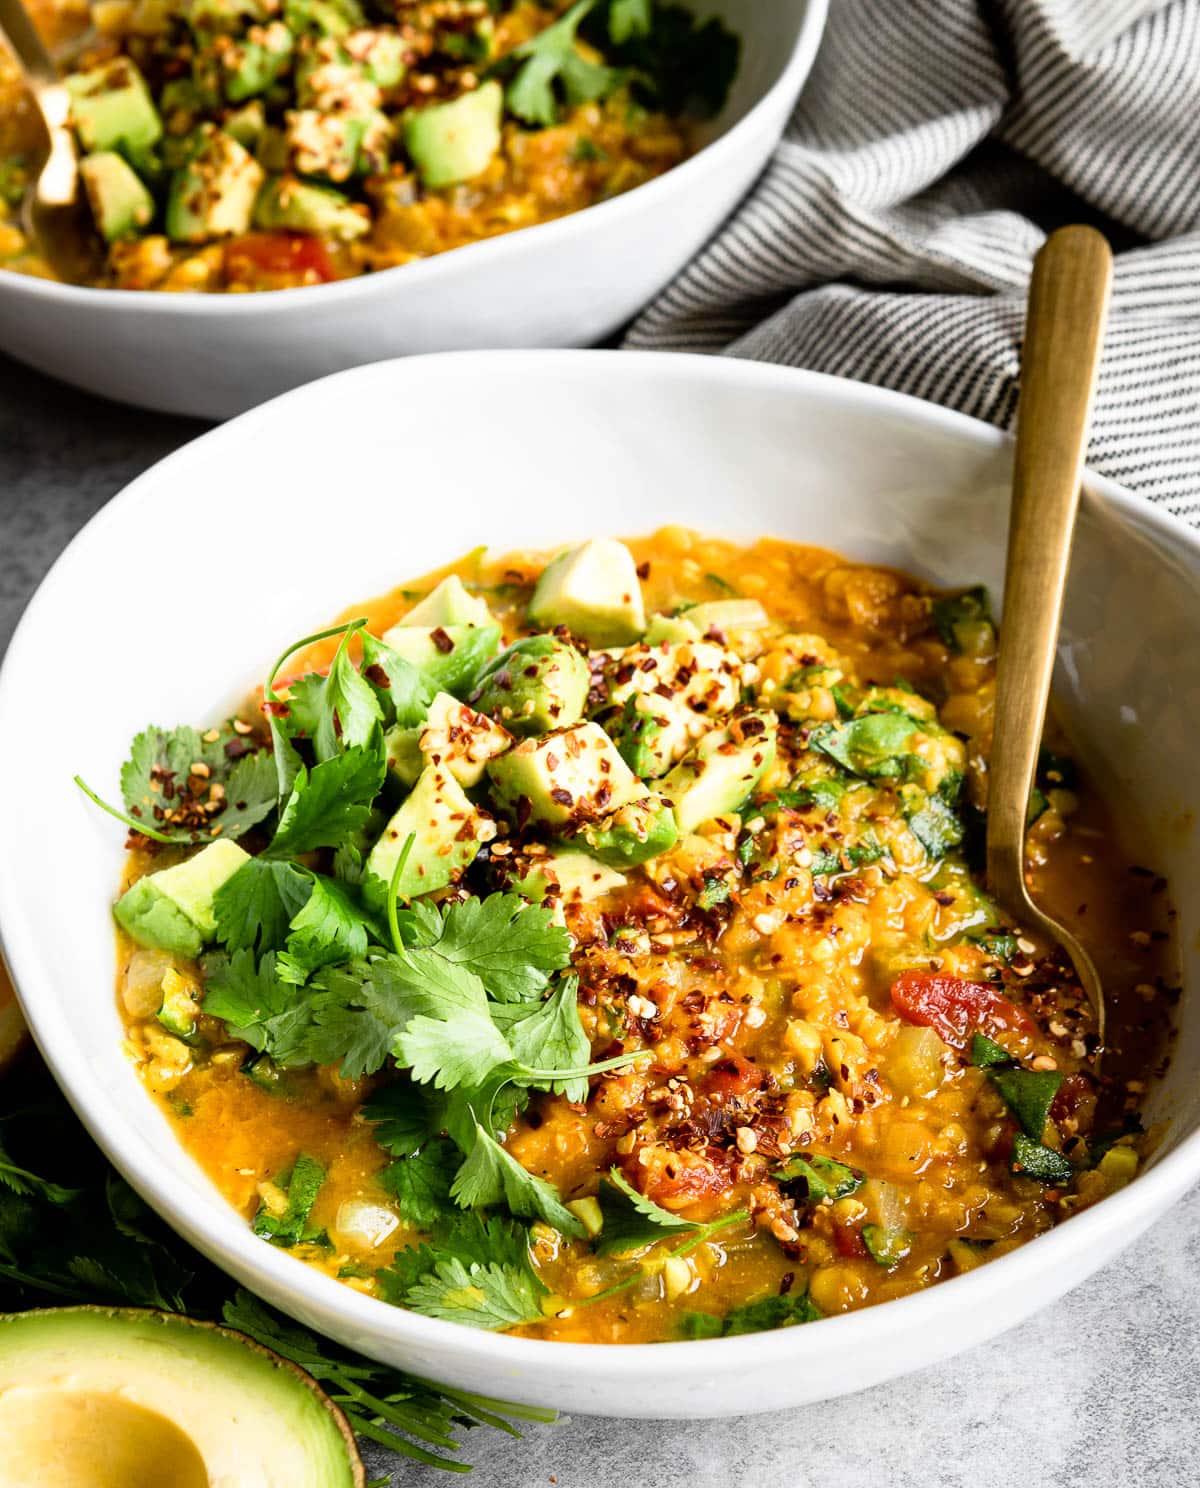 photo of a white bowl of red lentil soup with cilantro, avocado and red pepper flakes on top